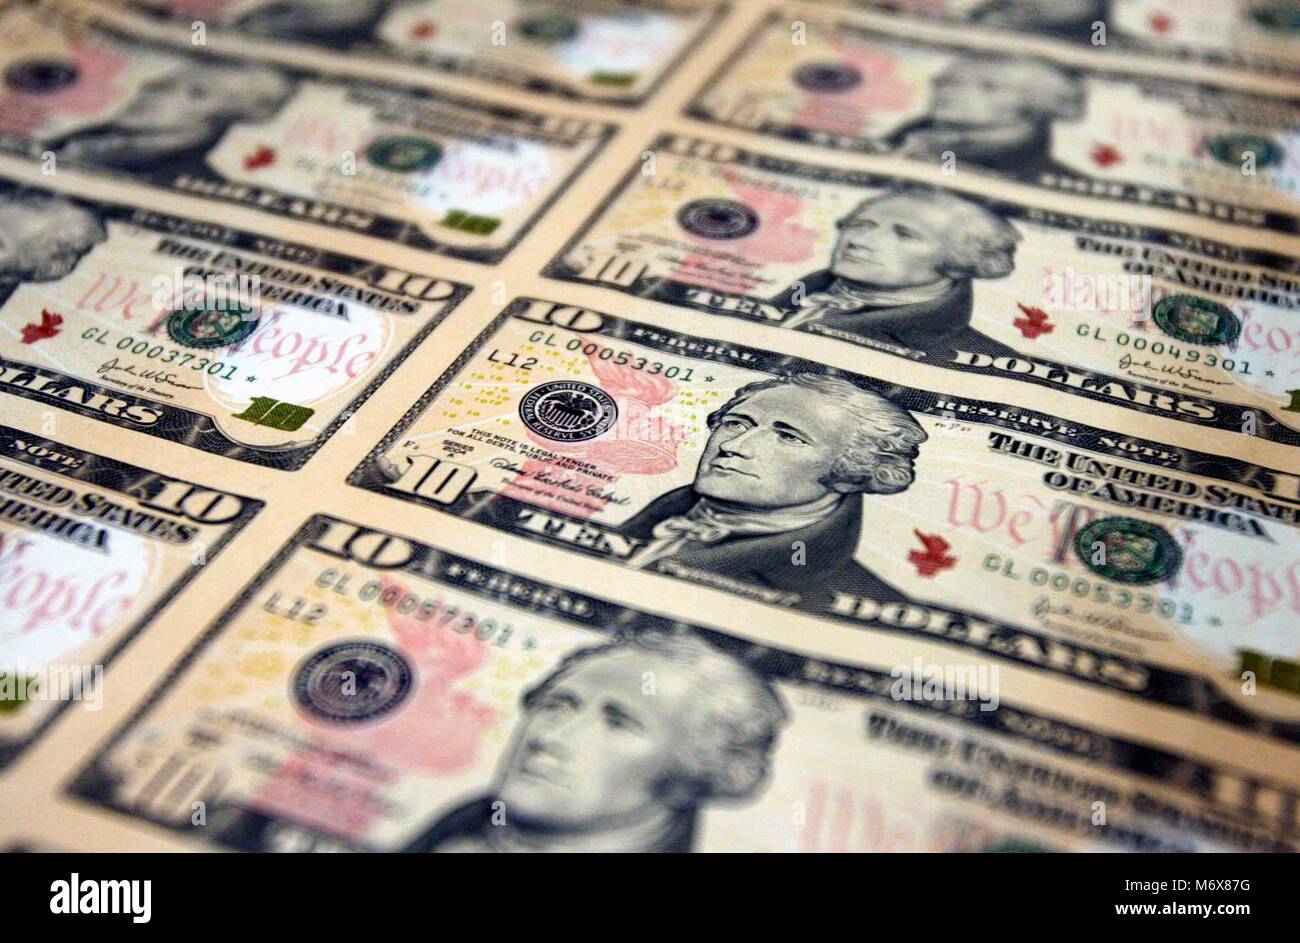 Beijing, China. 2nd Mar, 2006. This file photo taken on March 2, 2006 shows the United States 10-dollar bill. With the United States retreating to the stronghold of protectionism and nationalism, concerns about a trade war are rising around the globe. Credit: Lyu Mingxiang/TO GO WITH Xinhua Headlines: Trade war produces no winner/Xinhua/Alamy Live News Stock Photo